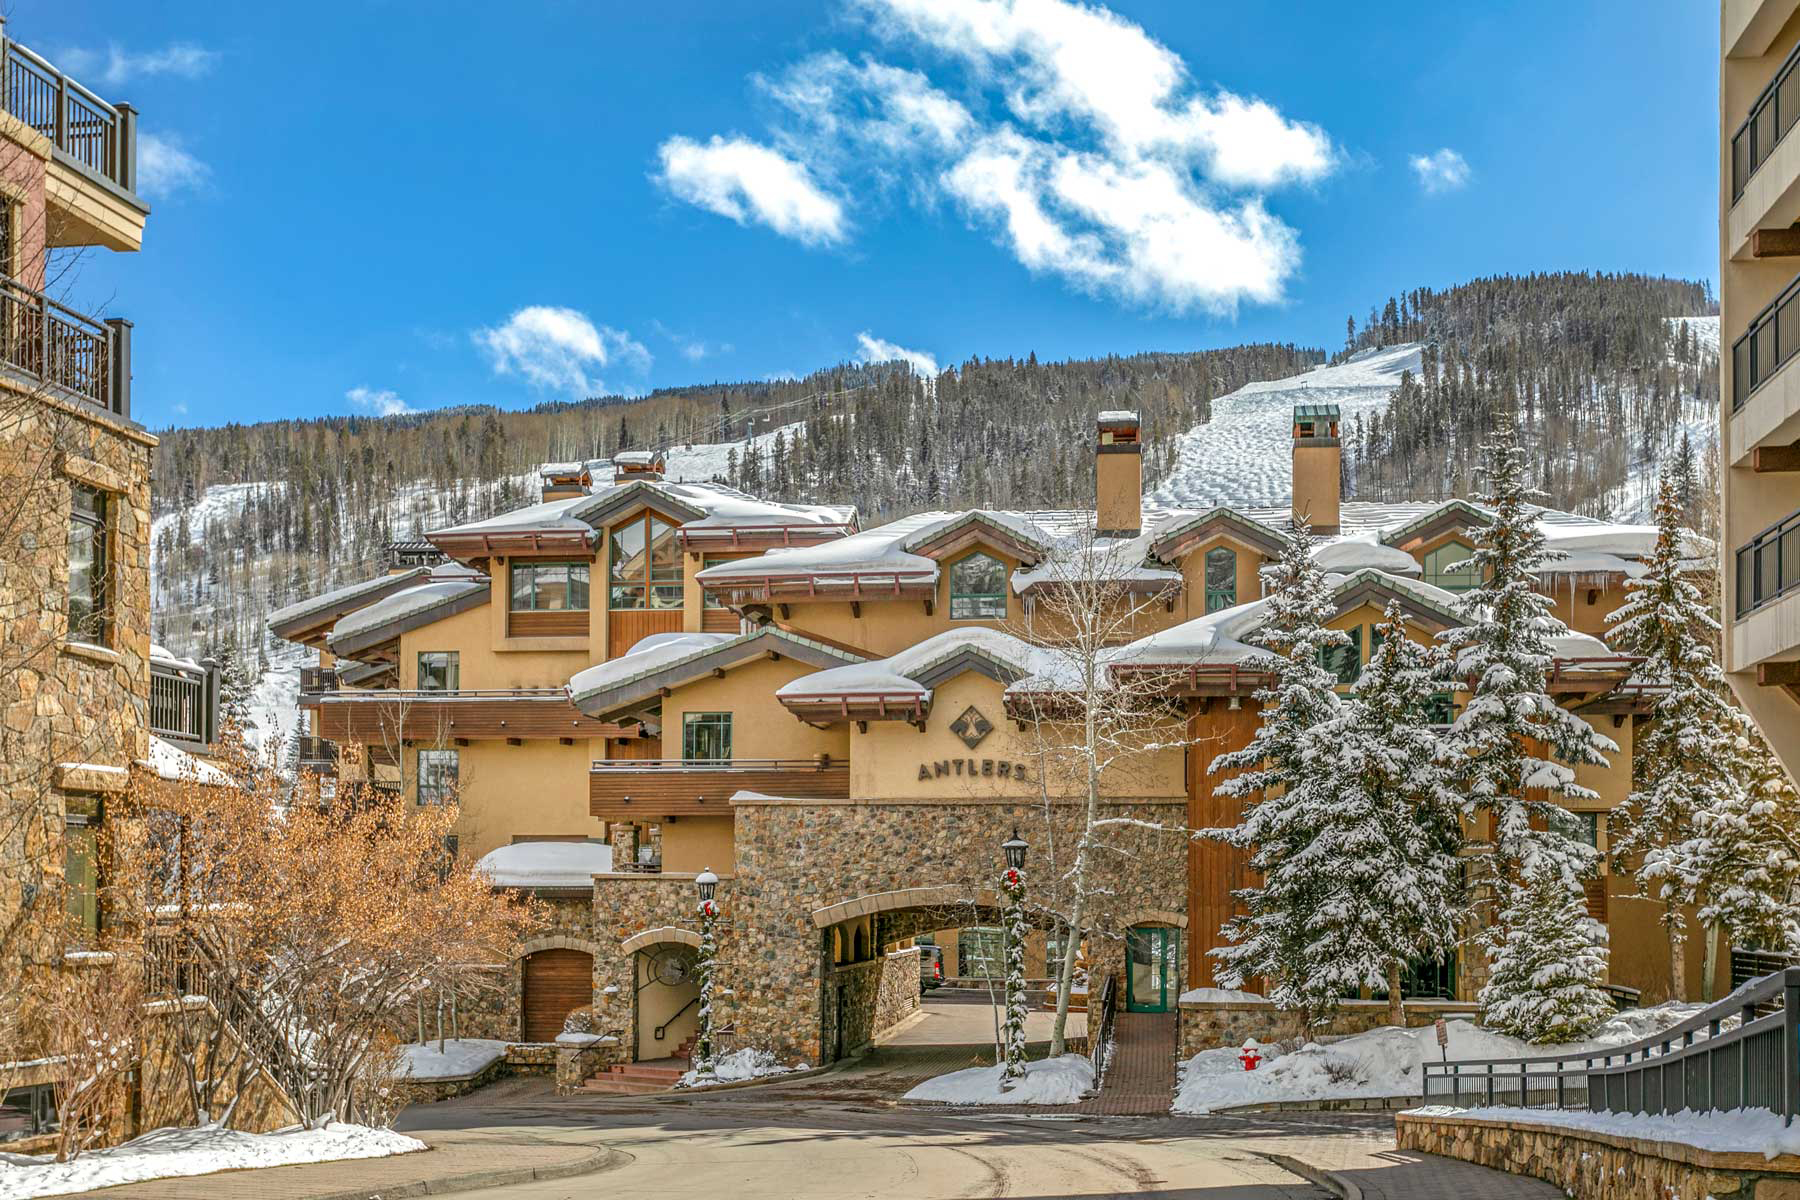 A favorite with Colorado skiers, Antlers at Vail has occupied its enviable location steps from Vail’s Eagle Bahn gondola for 50 years.